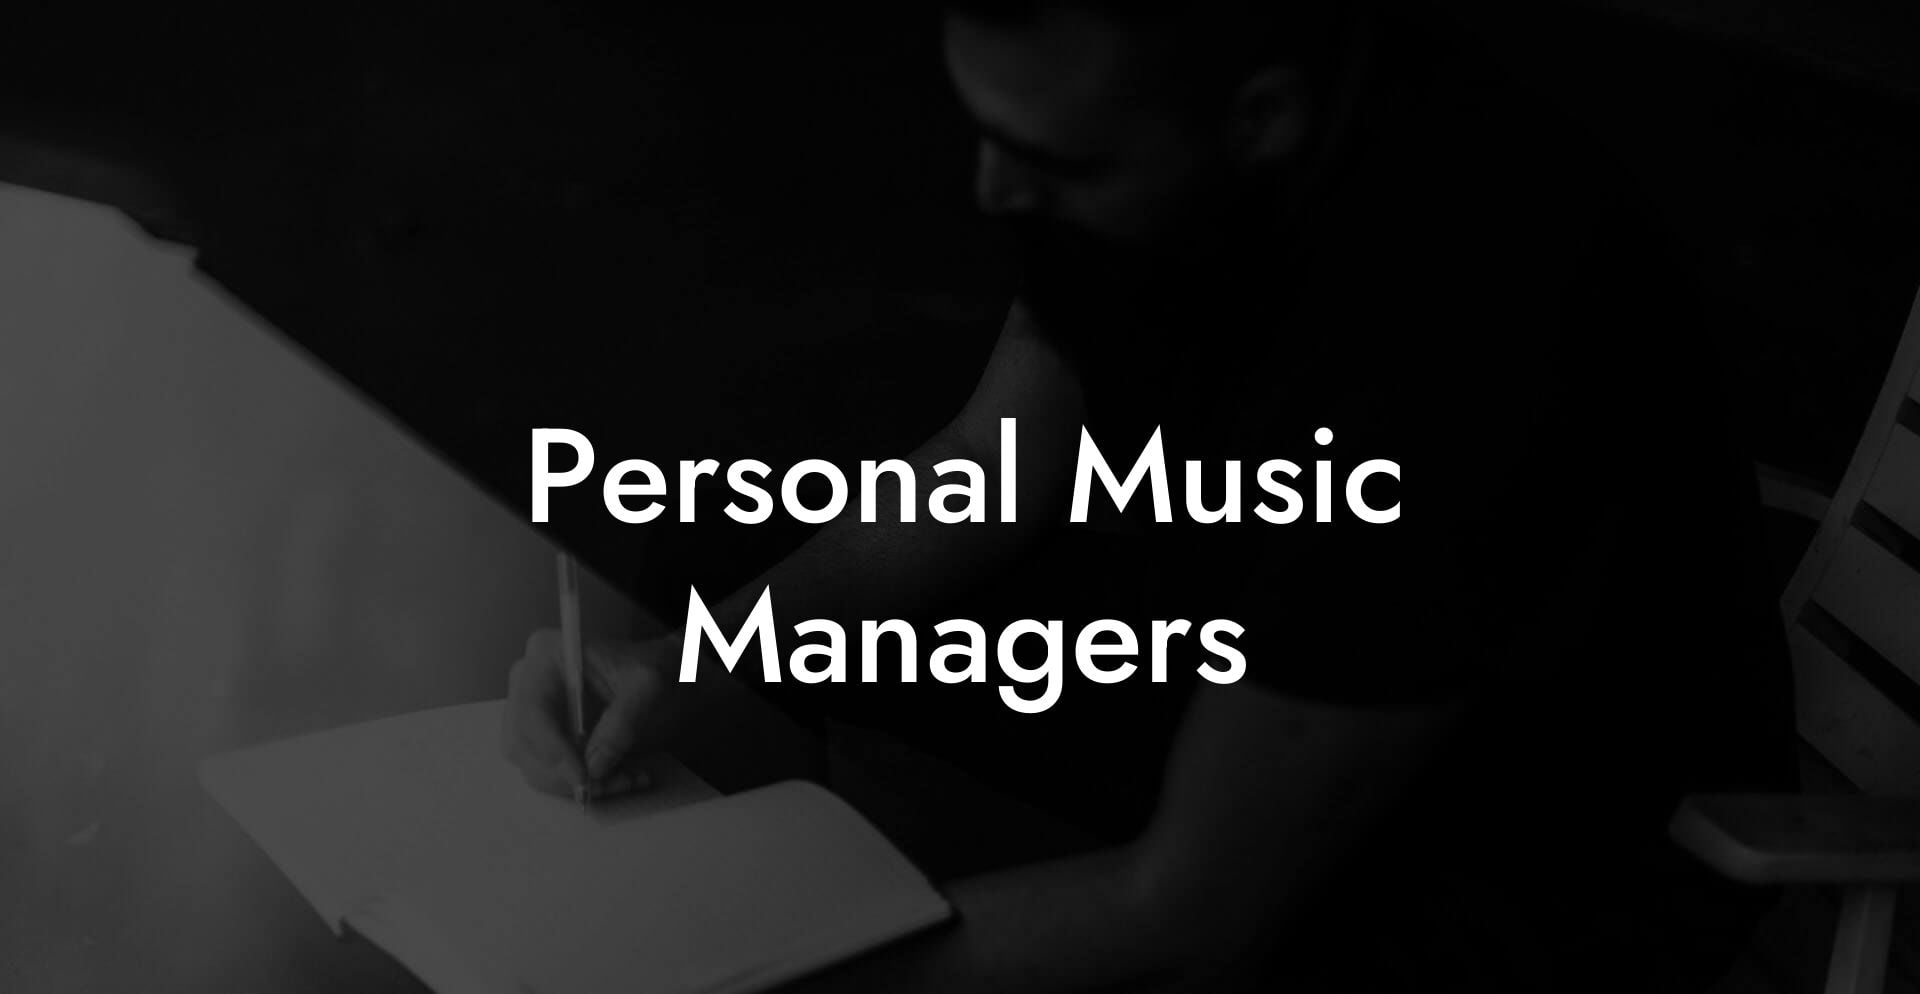 Personal Music Managers